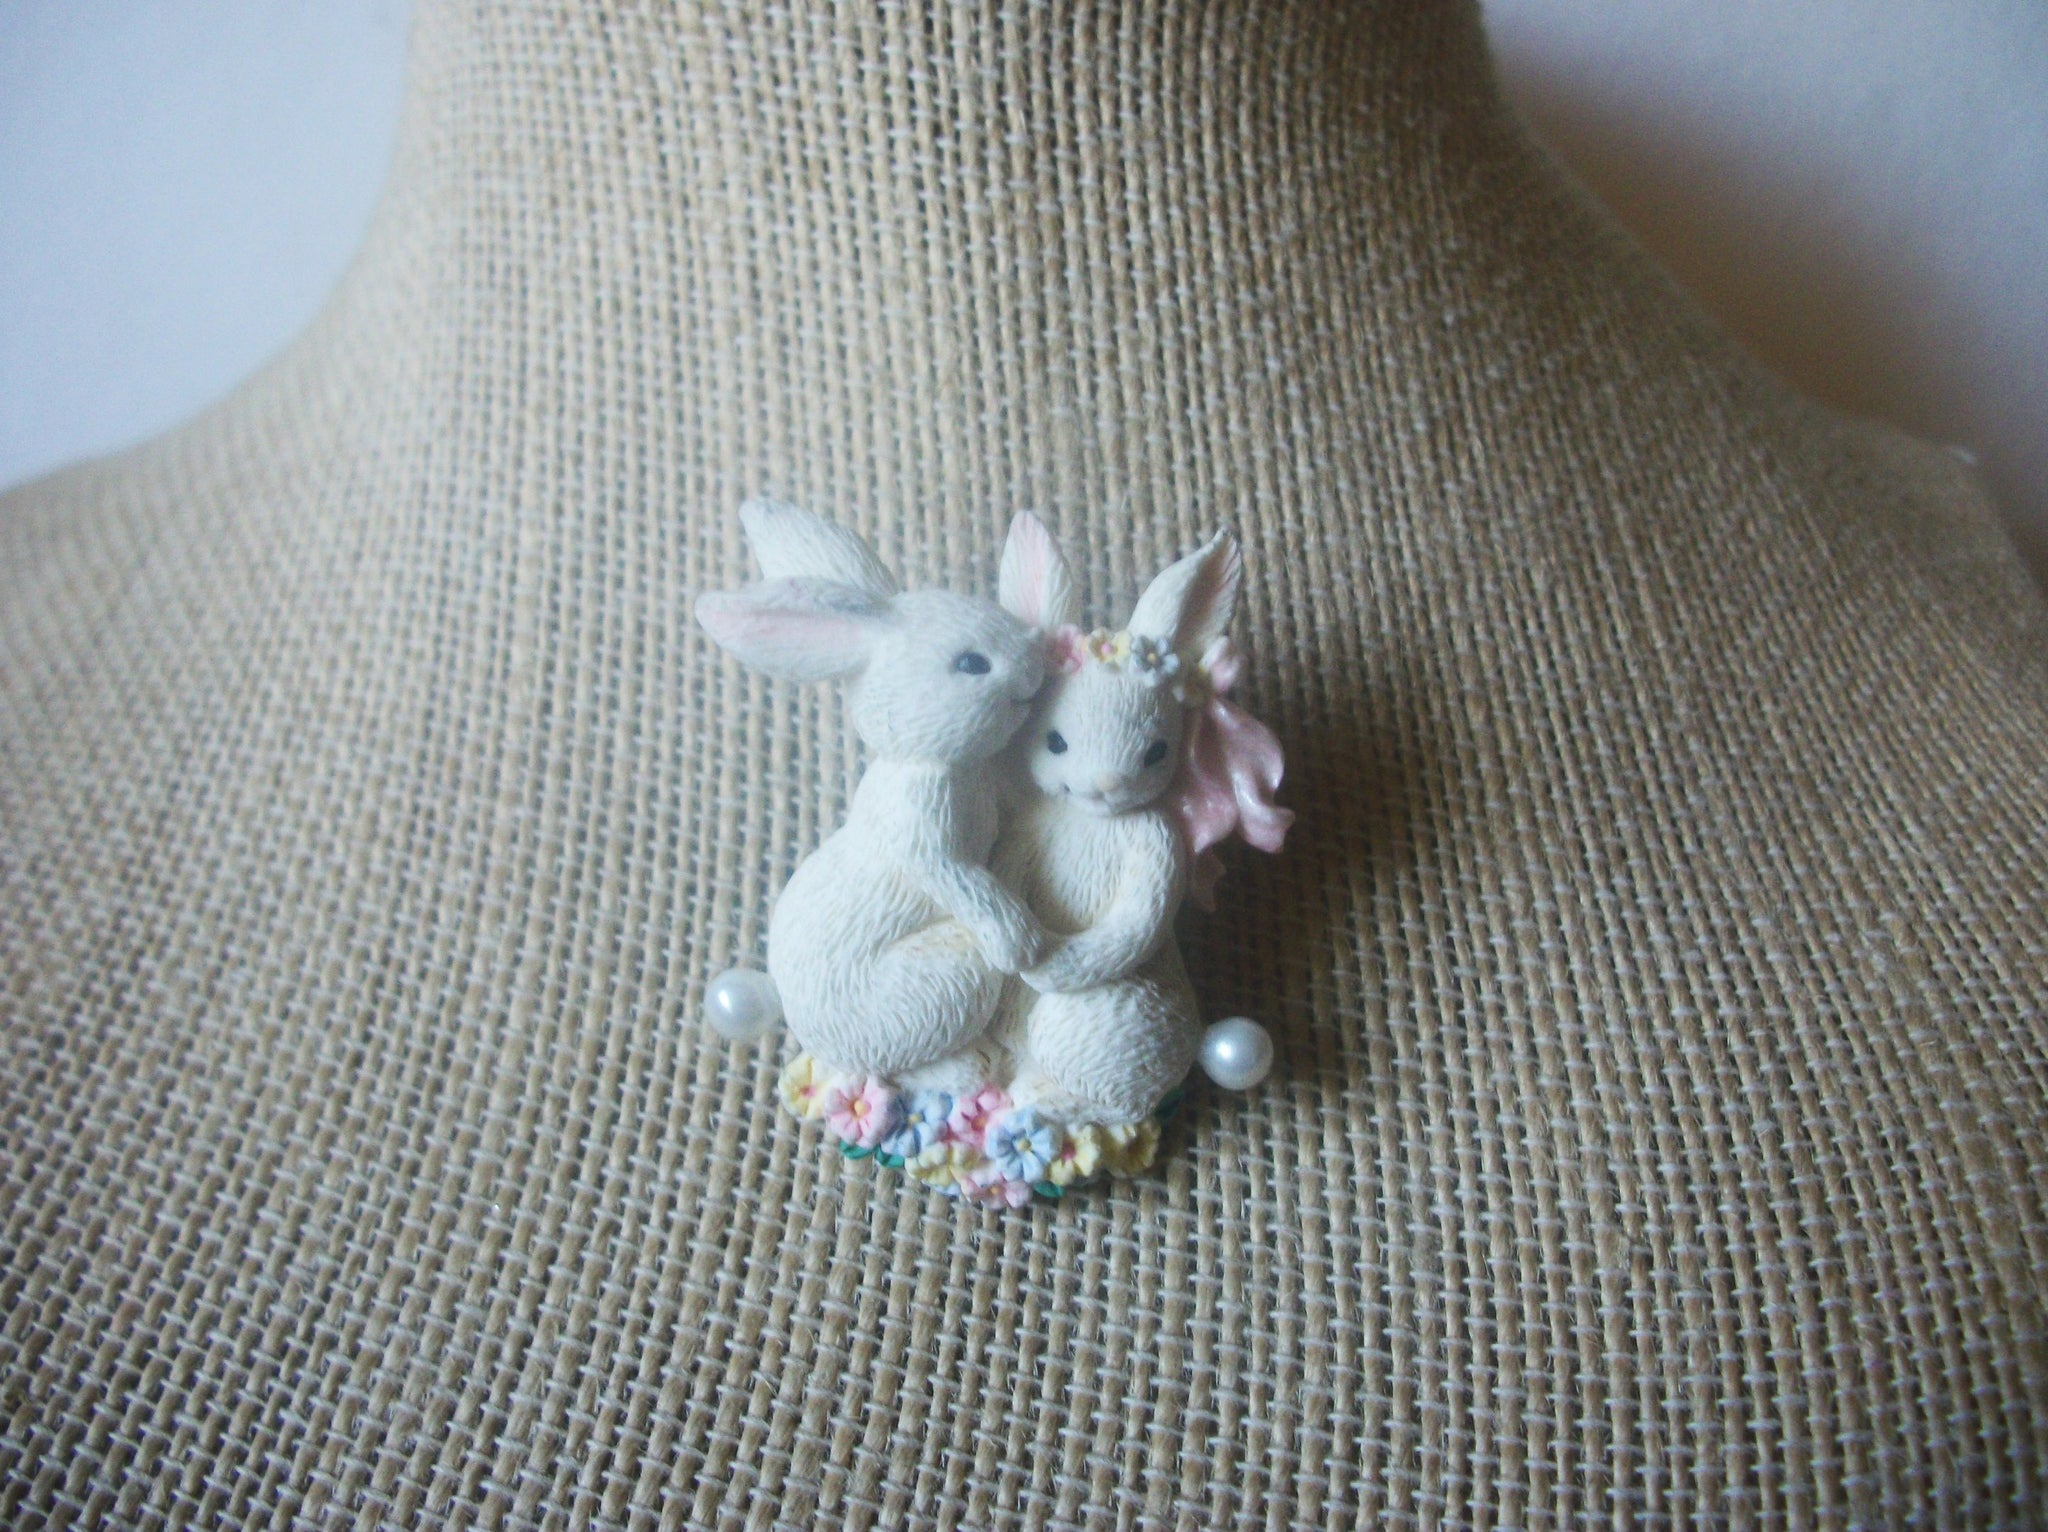 Vintage Jewelry, Little Bunnies In Love White Faux Pearl Cotton Tails, Old Plastic Brooch Pin 52017